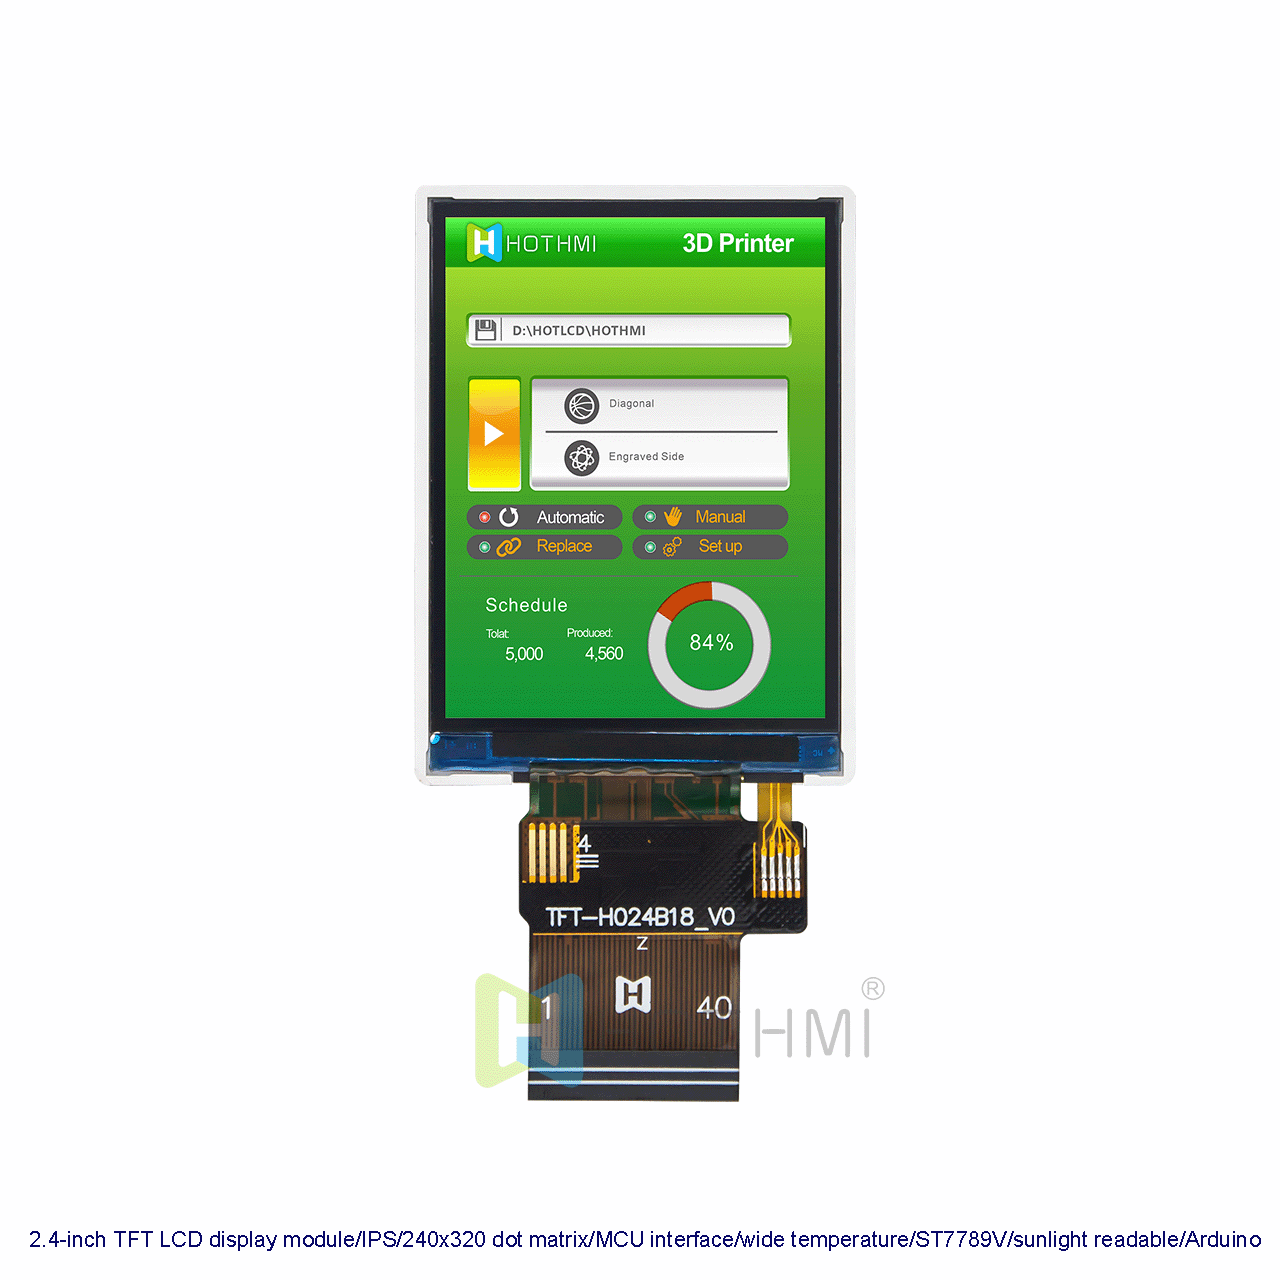 2.4-inch TFT LCD display module/IPS full viewing angle/240x320 dot matrix/MCU interface/wide temperature/ST7789V/sunlight readable/Arduino compatible